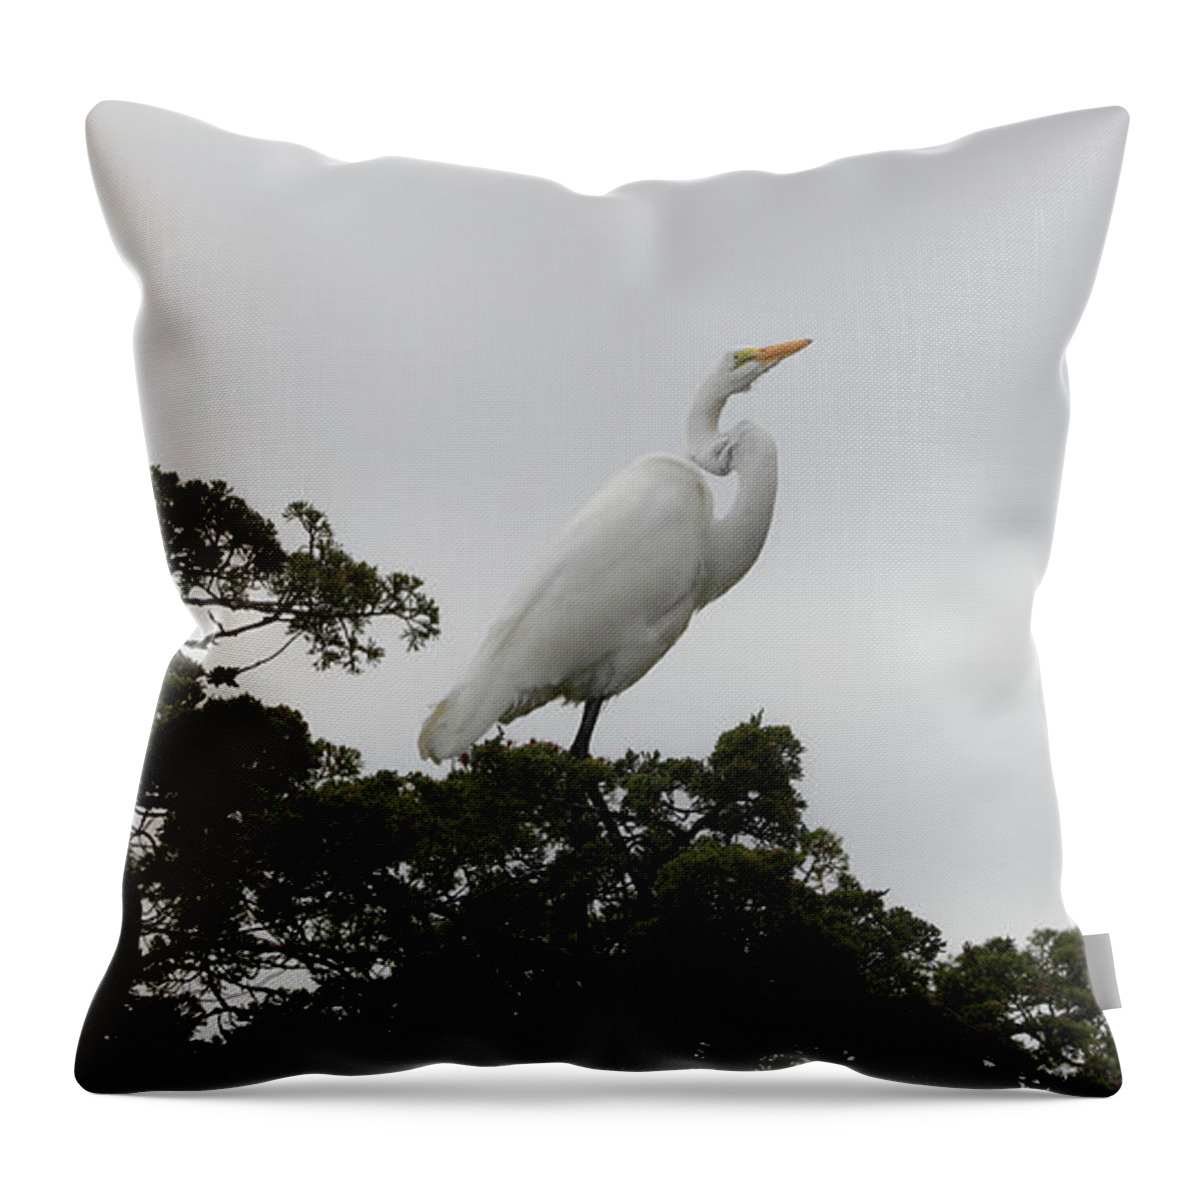 Great Egret Throw Pillow featuring the photograph Great Egret Balanced by Doolittle Photography and Art